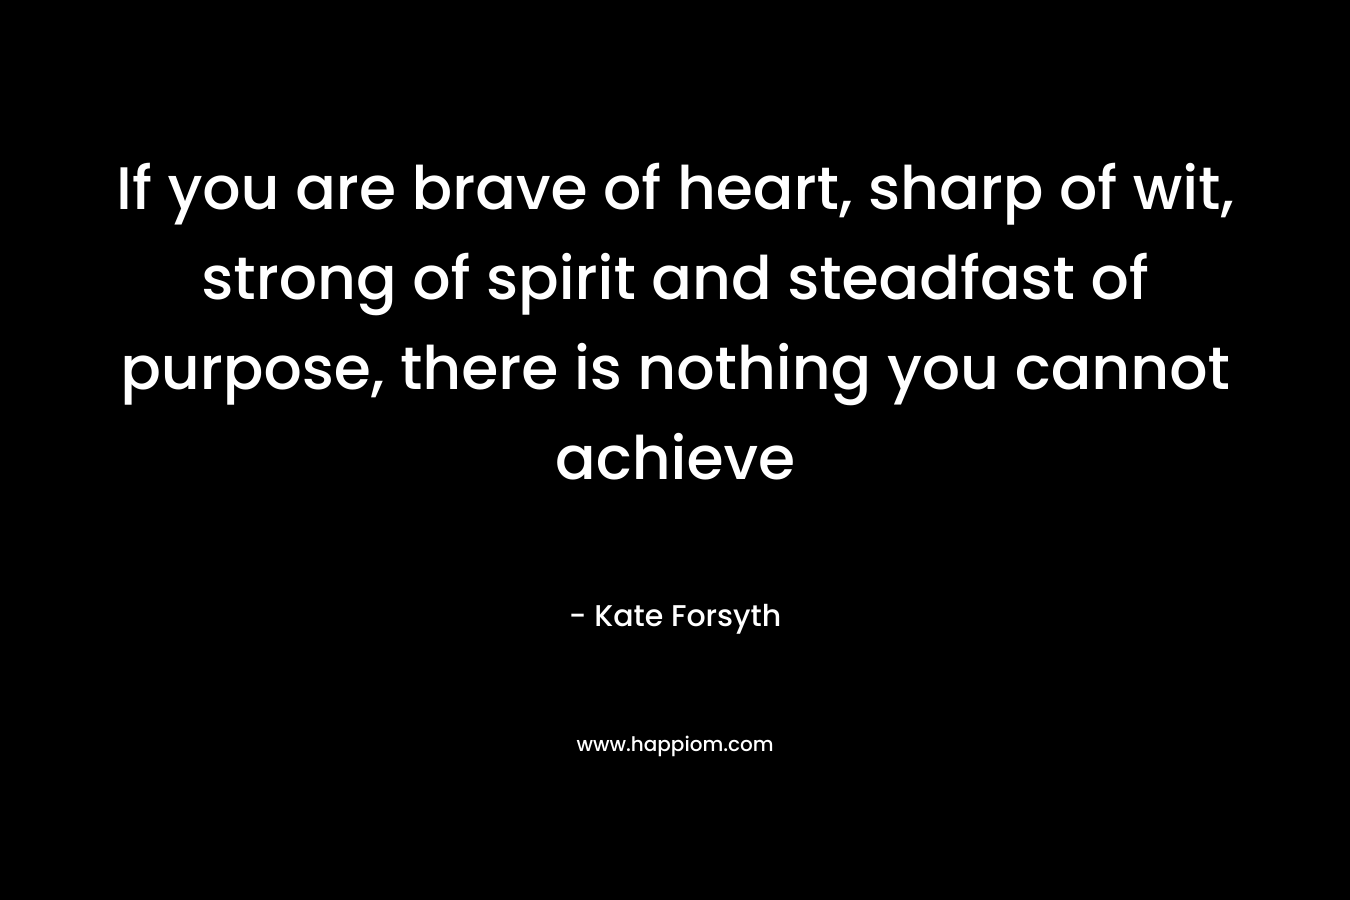 If you are brave of heart, sharp of wit, strong of spirit and steadfast of purpose, there is nothing you cannot achieve